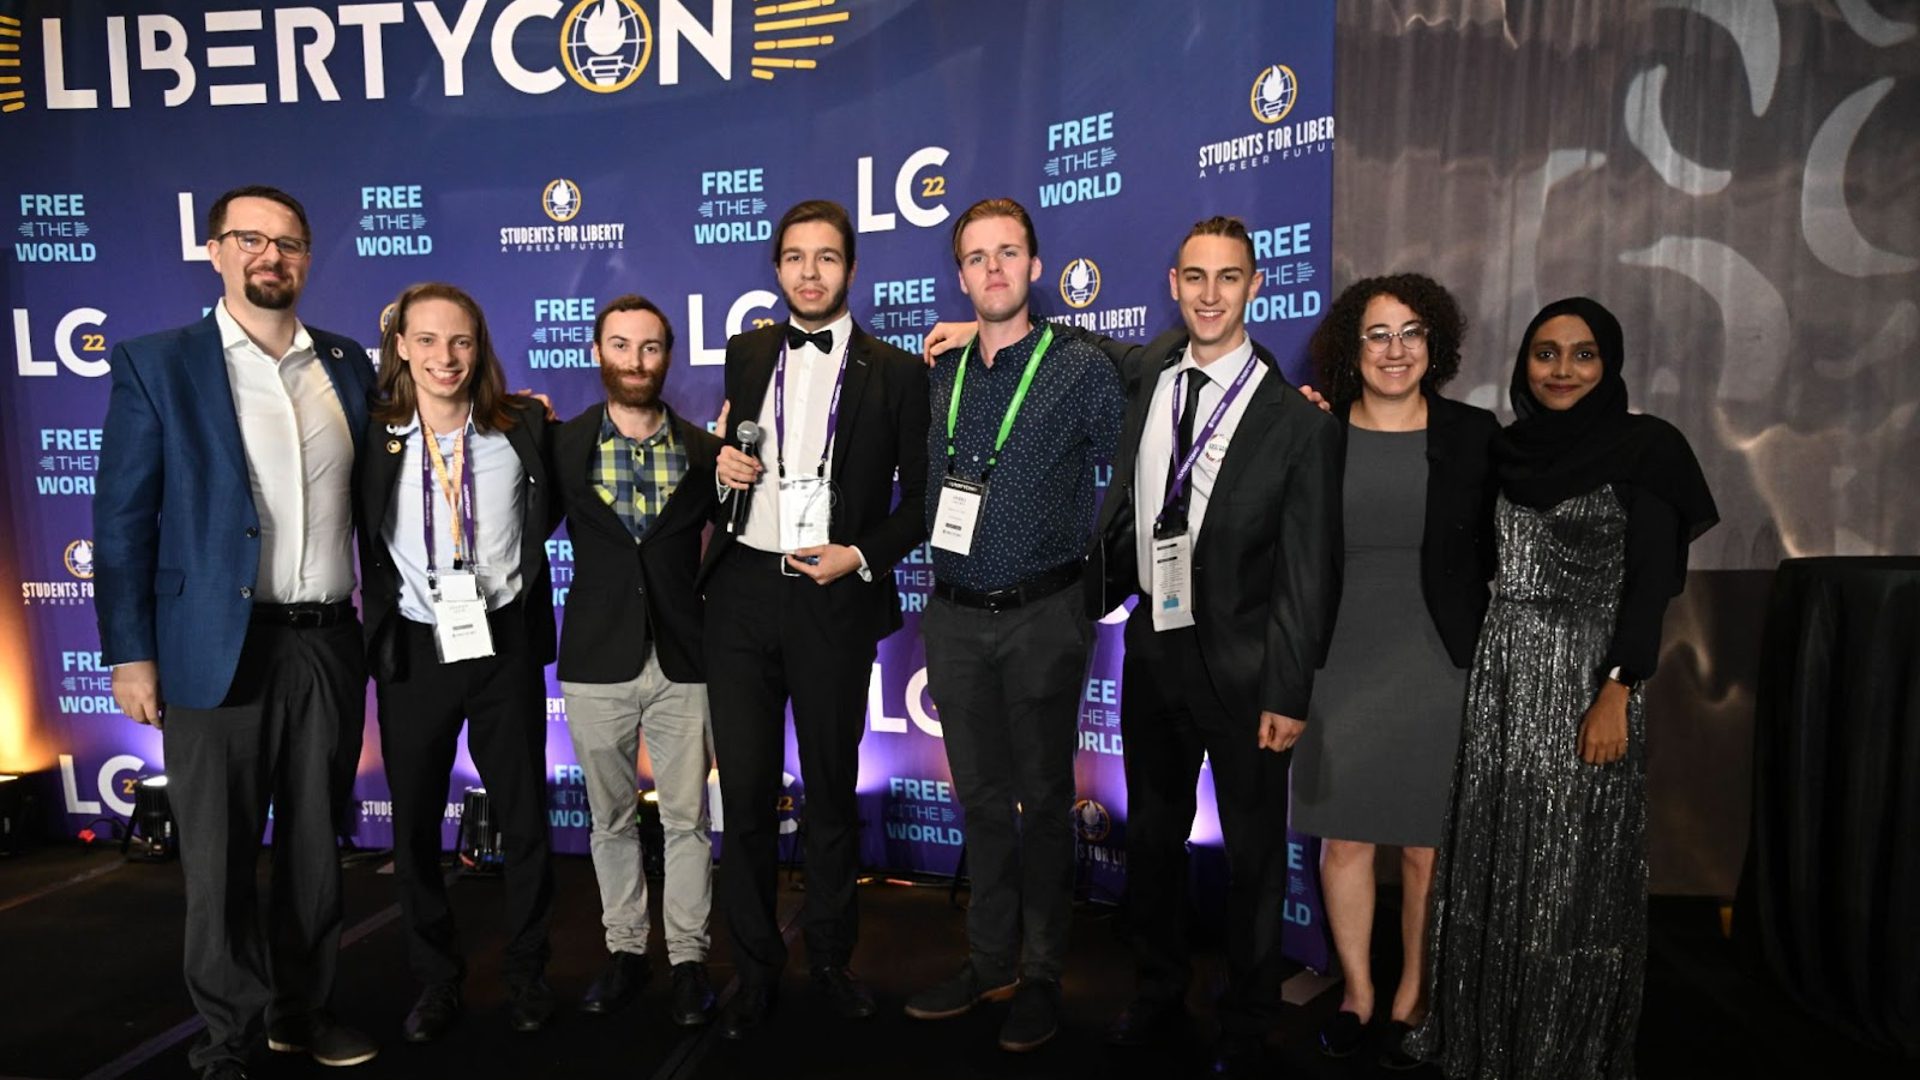 Our team from the Czech Republic received our global Group of the Year Award at LibertyCon International in Miami in October 2022.